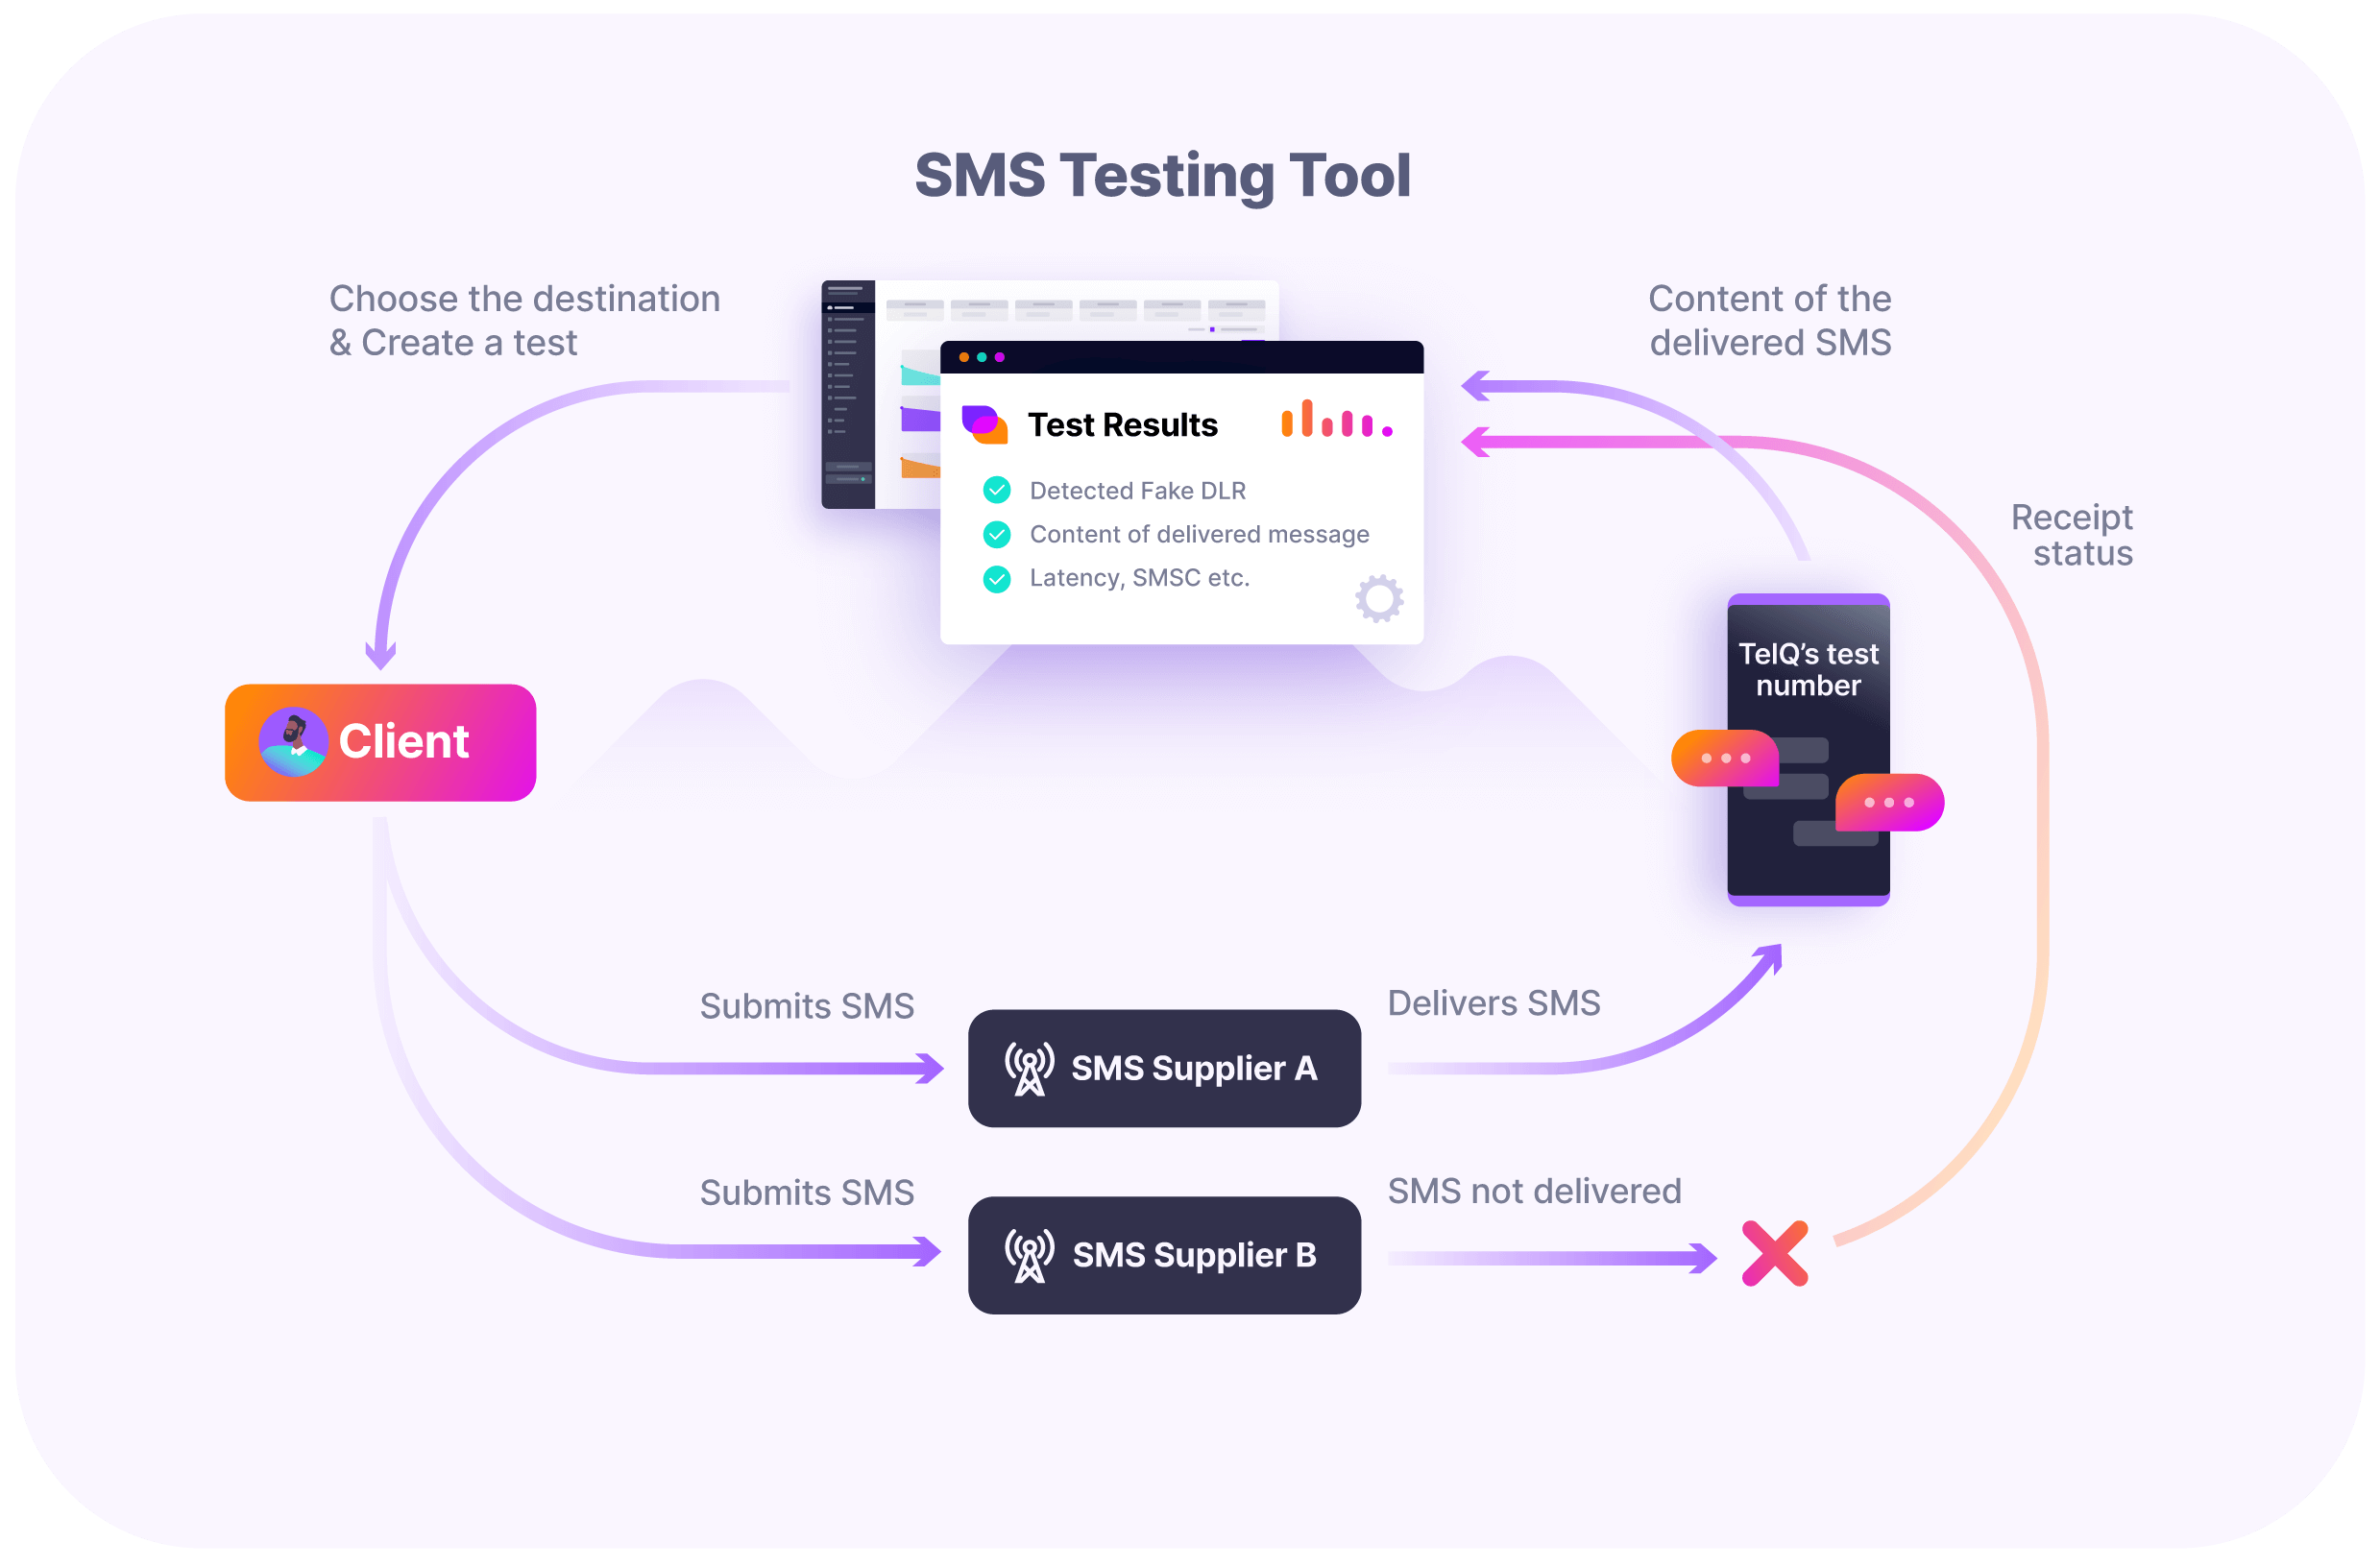 How TelQ testing tool works